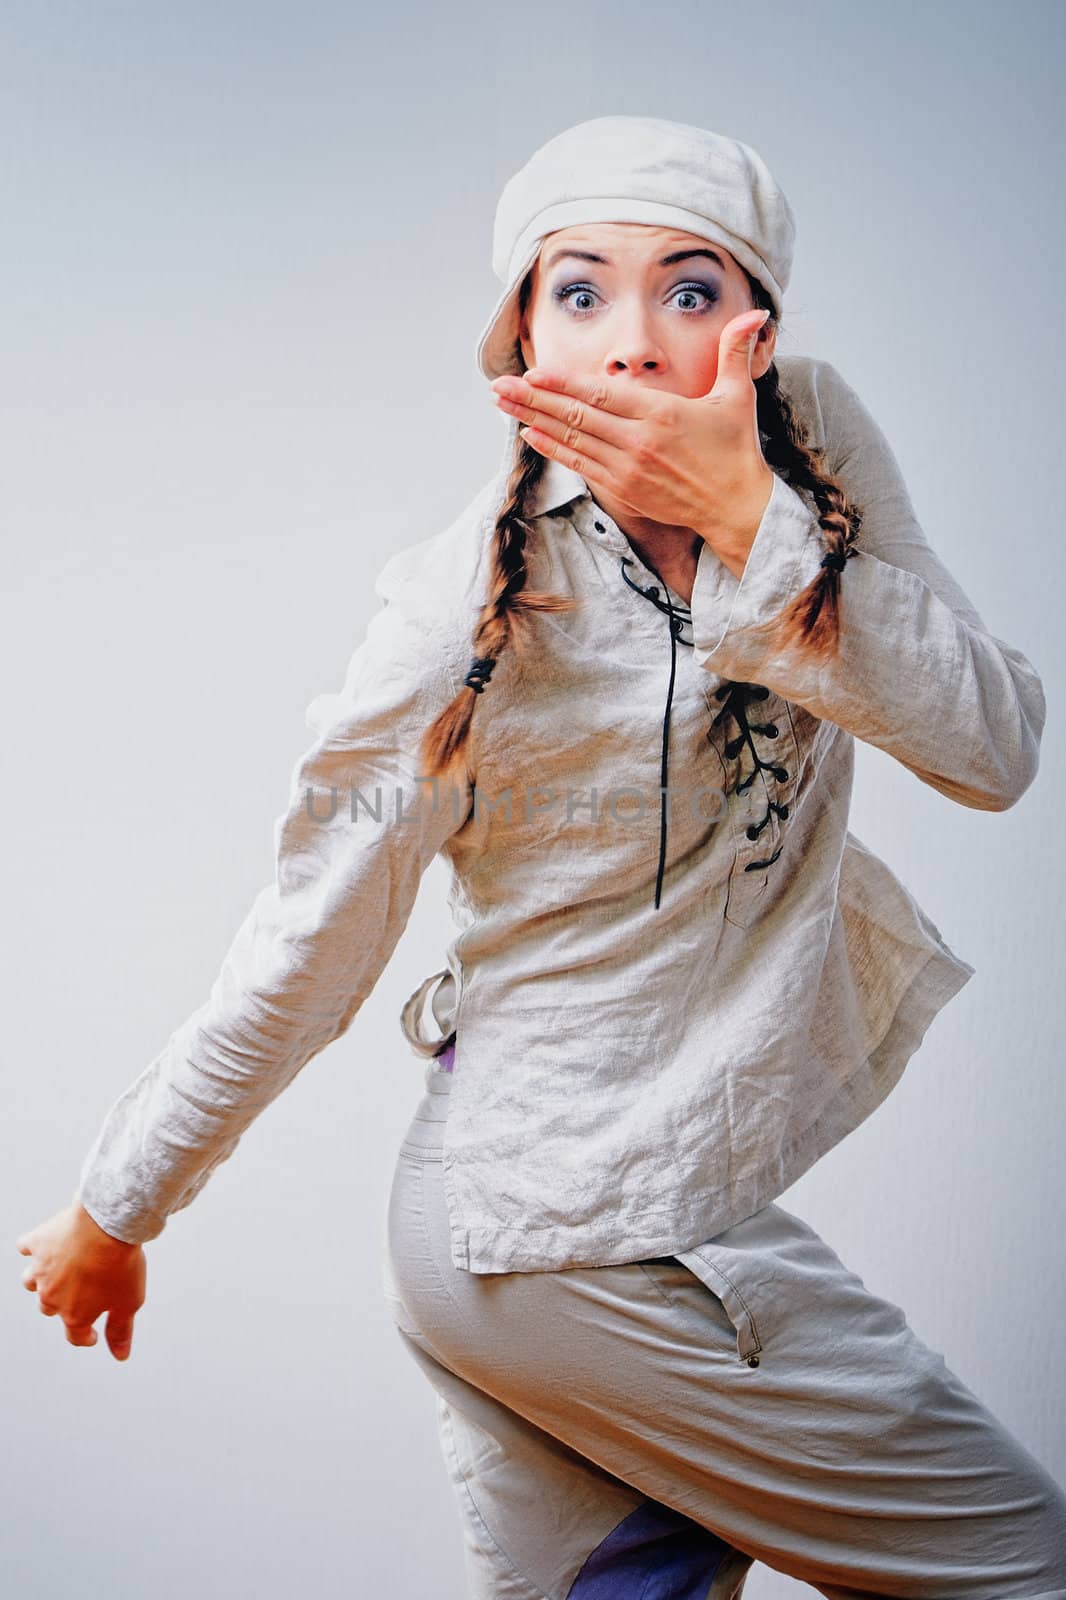 Surprised cute young woman in white suit